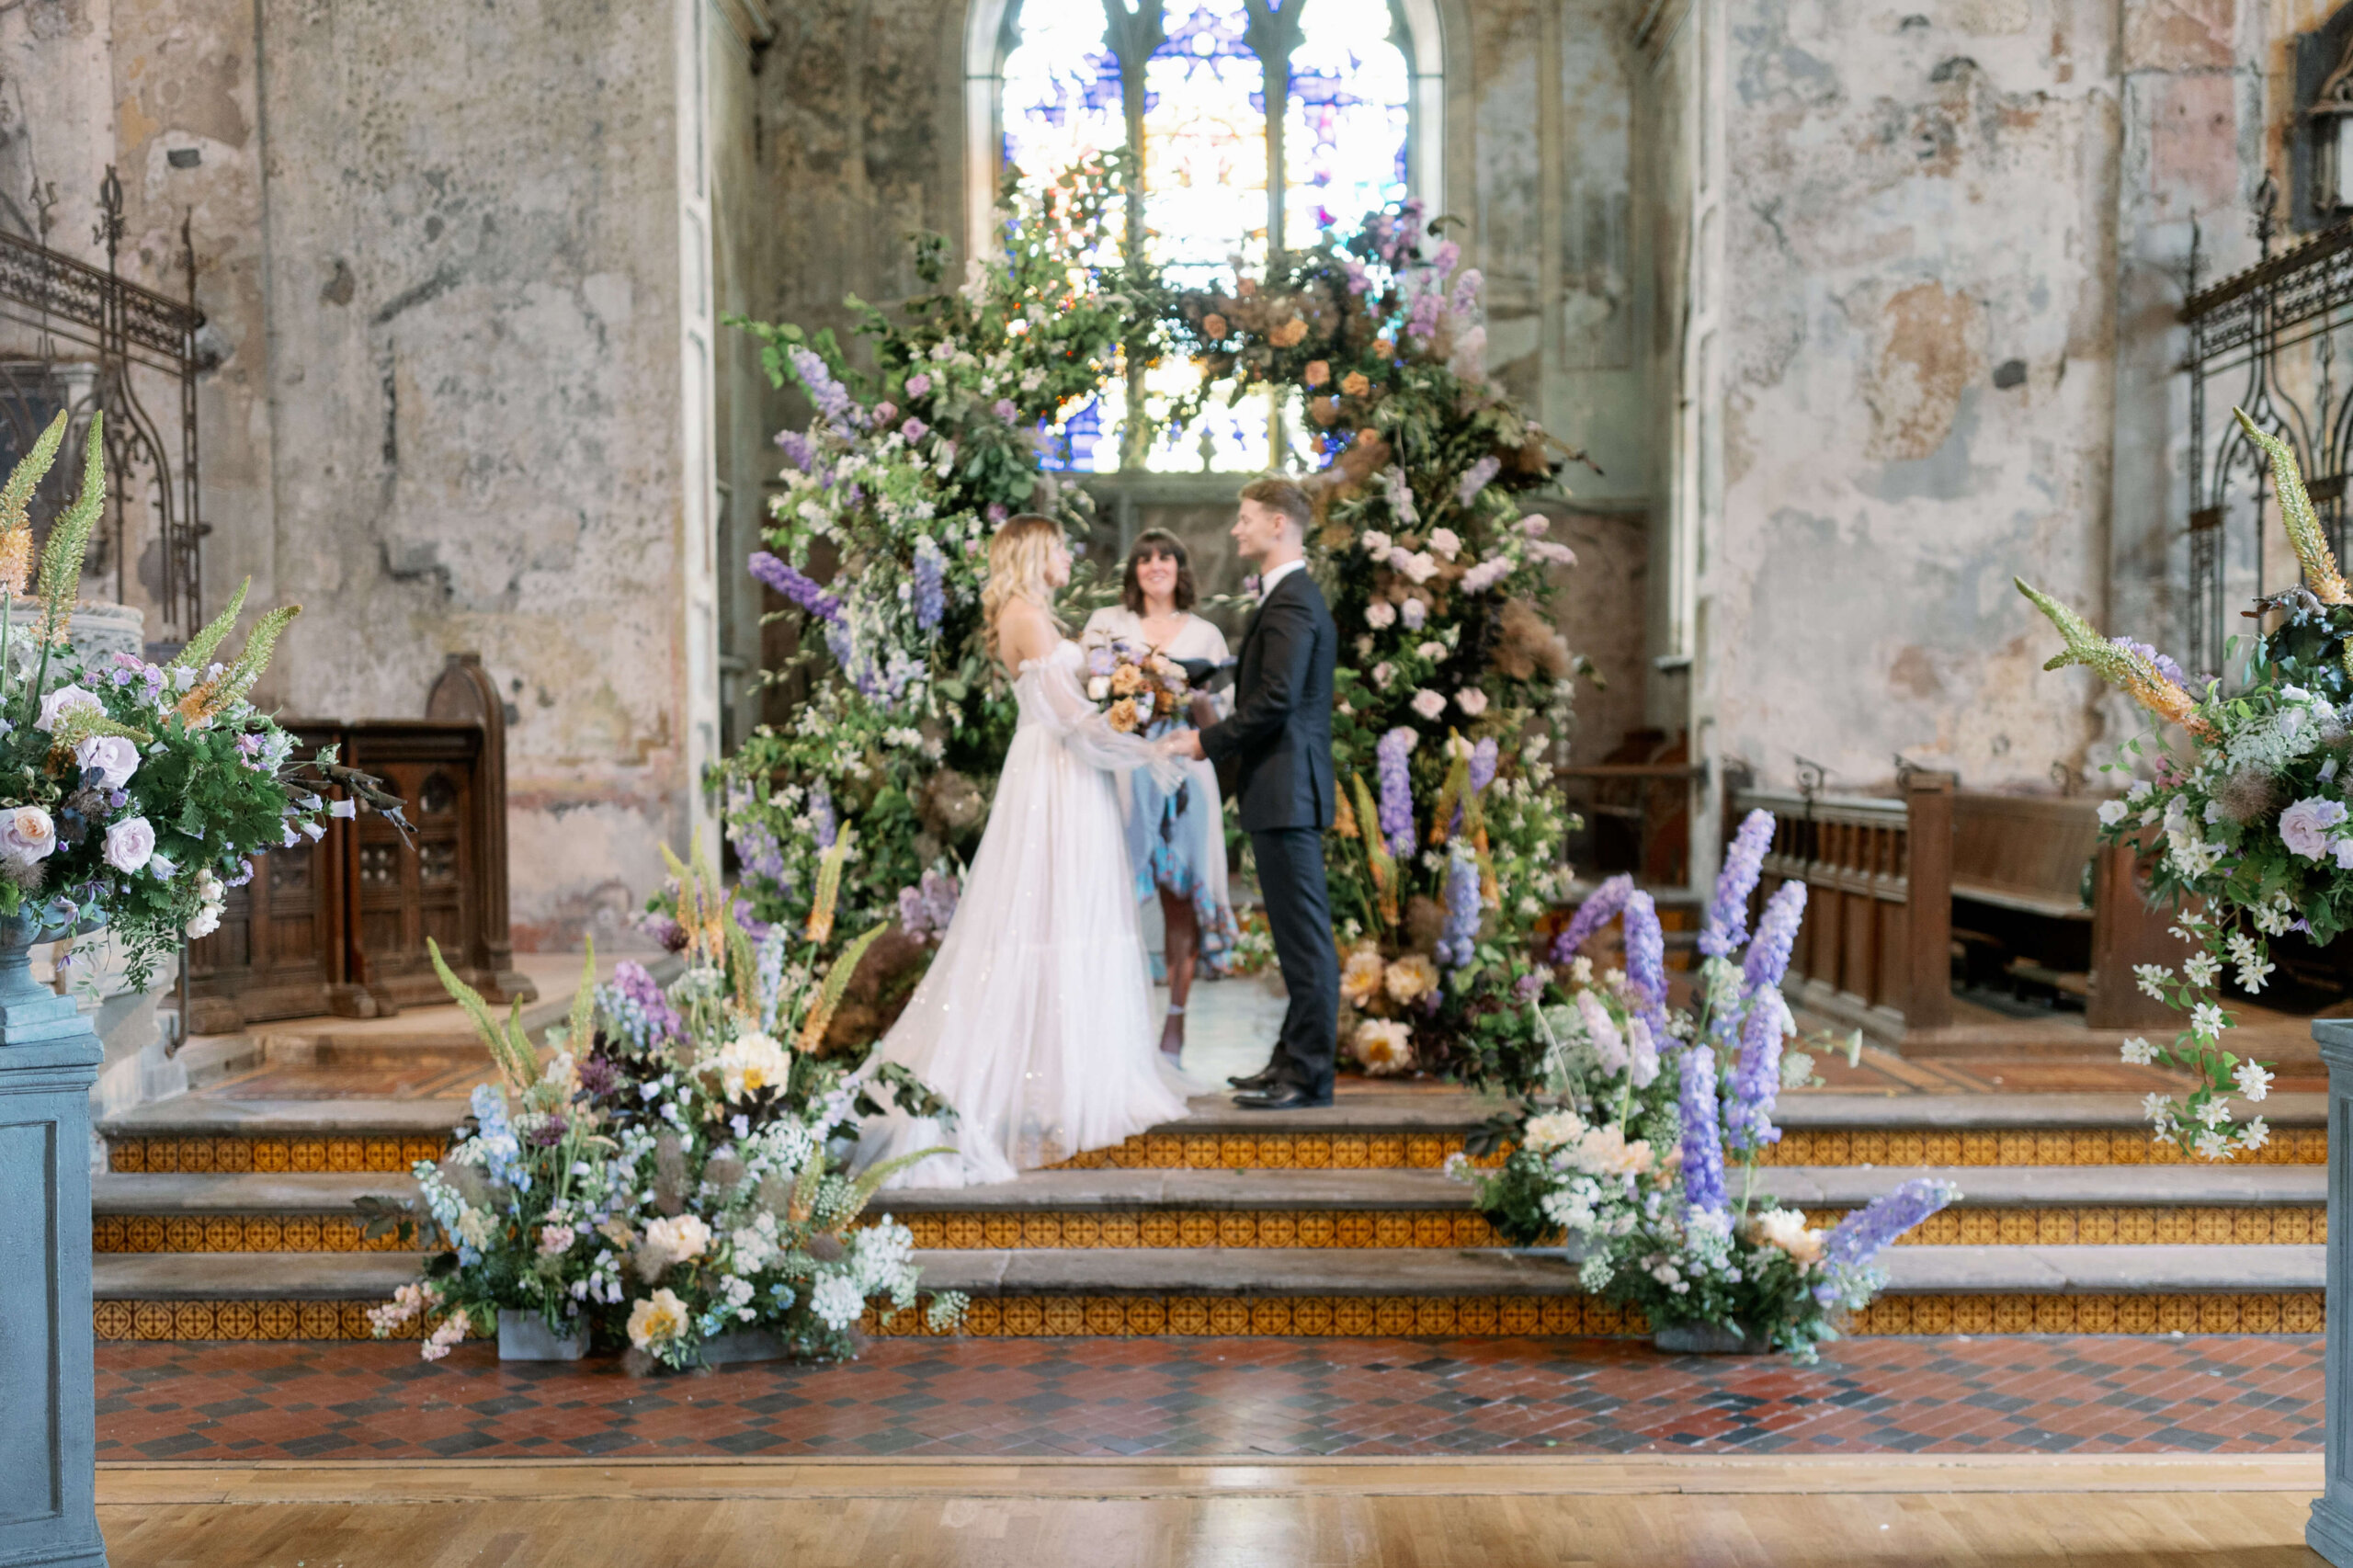 Wedding ceremony with lilac, powder blue and copper floral arch and meadows on the sides, bride on the left, groom on the right and celebrant behind them. A stained glass windo in the same colour palette behind the arch